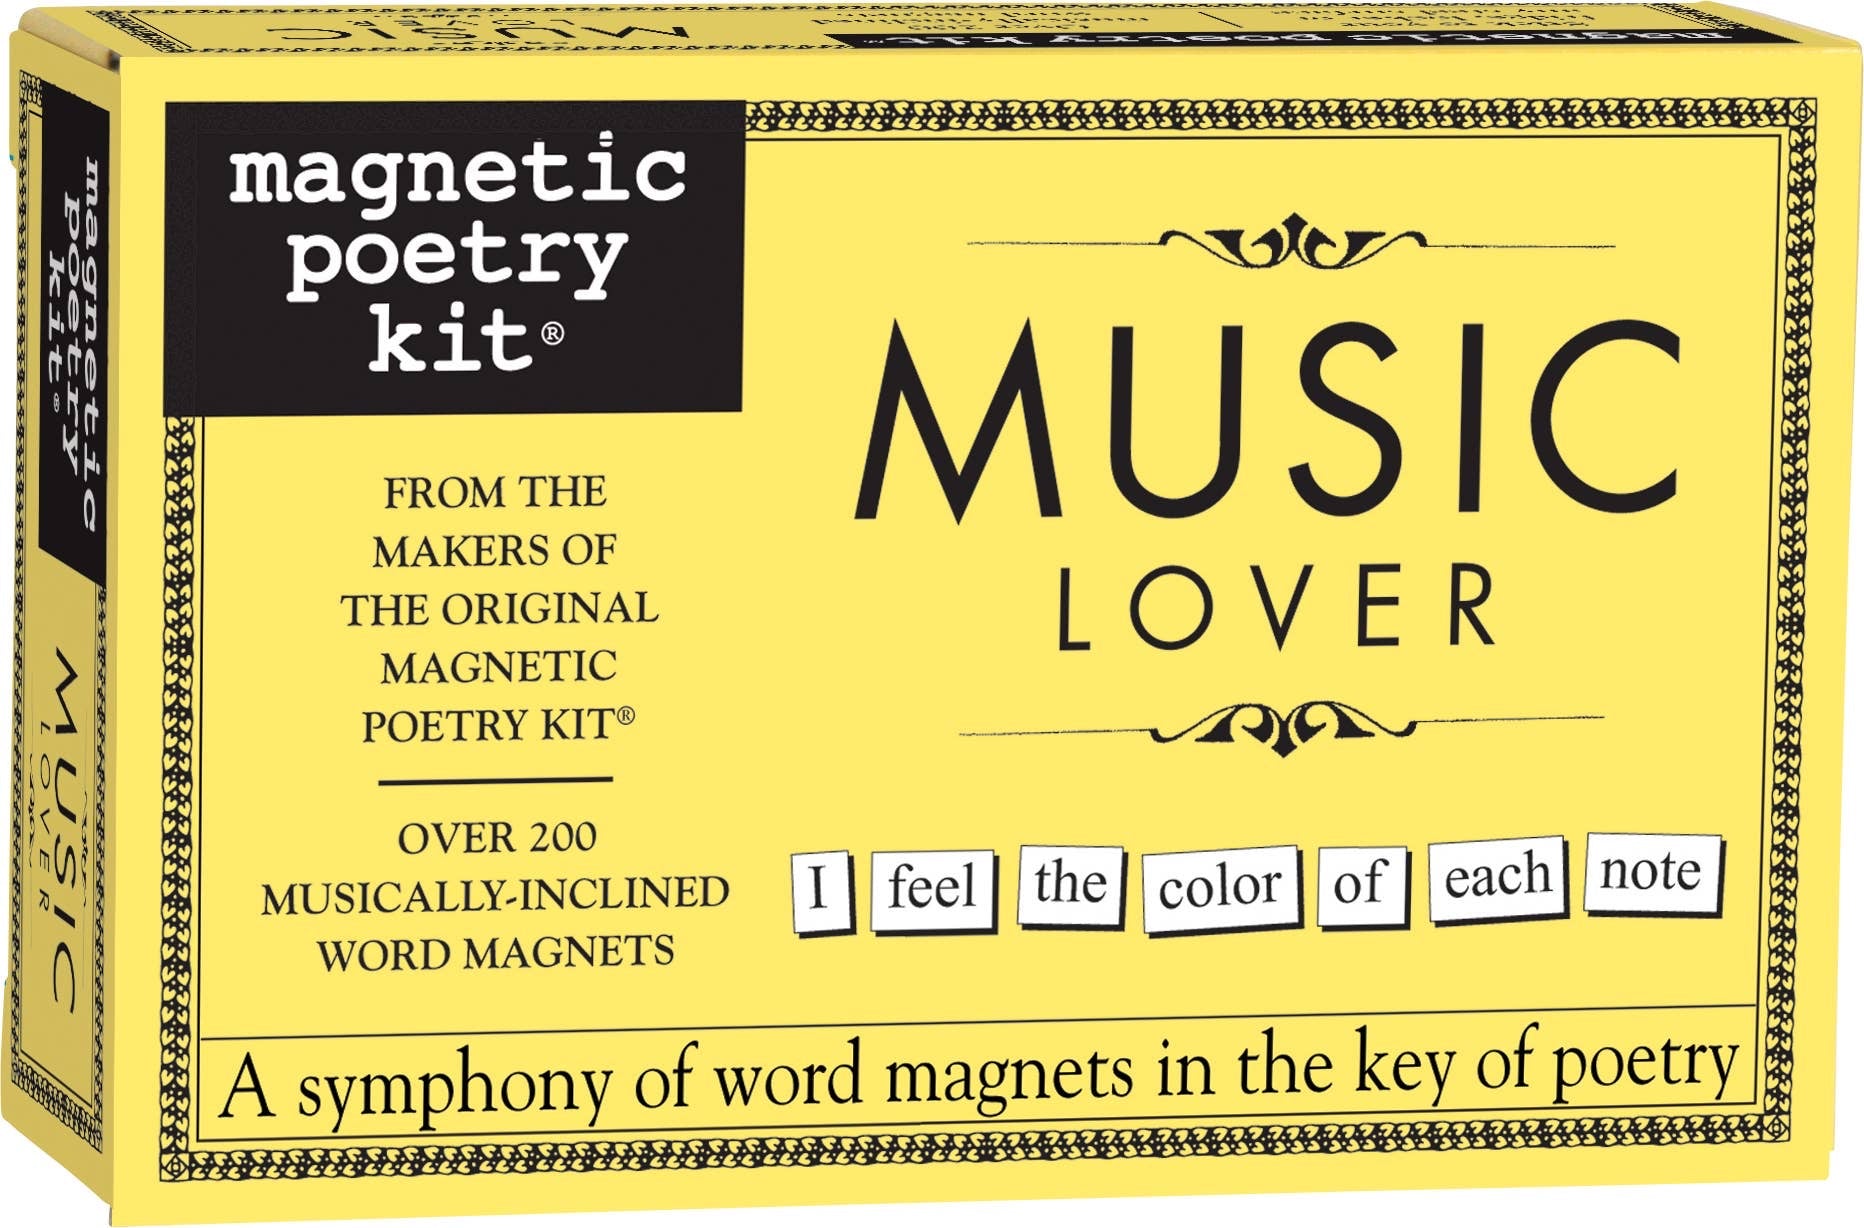 “The Music Lover” Magnetic Poetry Kit - by Magnetic Poetry, Inc - K. A. Artist Shop